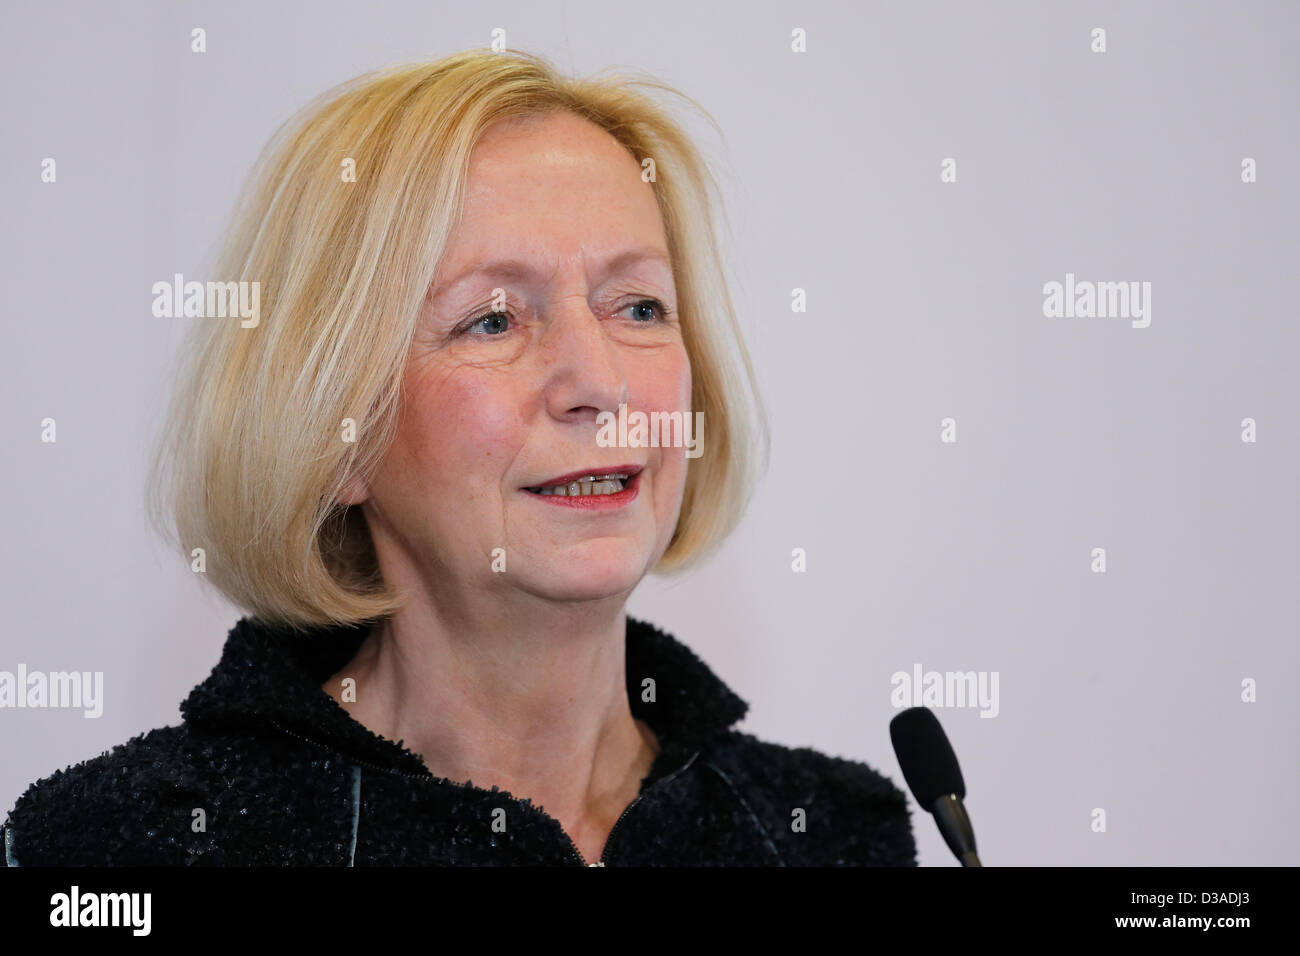 Berlin, Germany.  14th February, 2013. Statement of the New Federal Minister of Education and Research, Johanna Wanka at the Federal Ministry for Education and Research in Berlin. Credit:  Reynaldo Chaib Paganelli / Alamy Live News Stock Photo